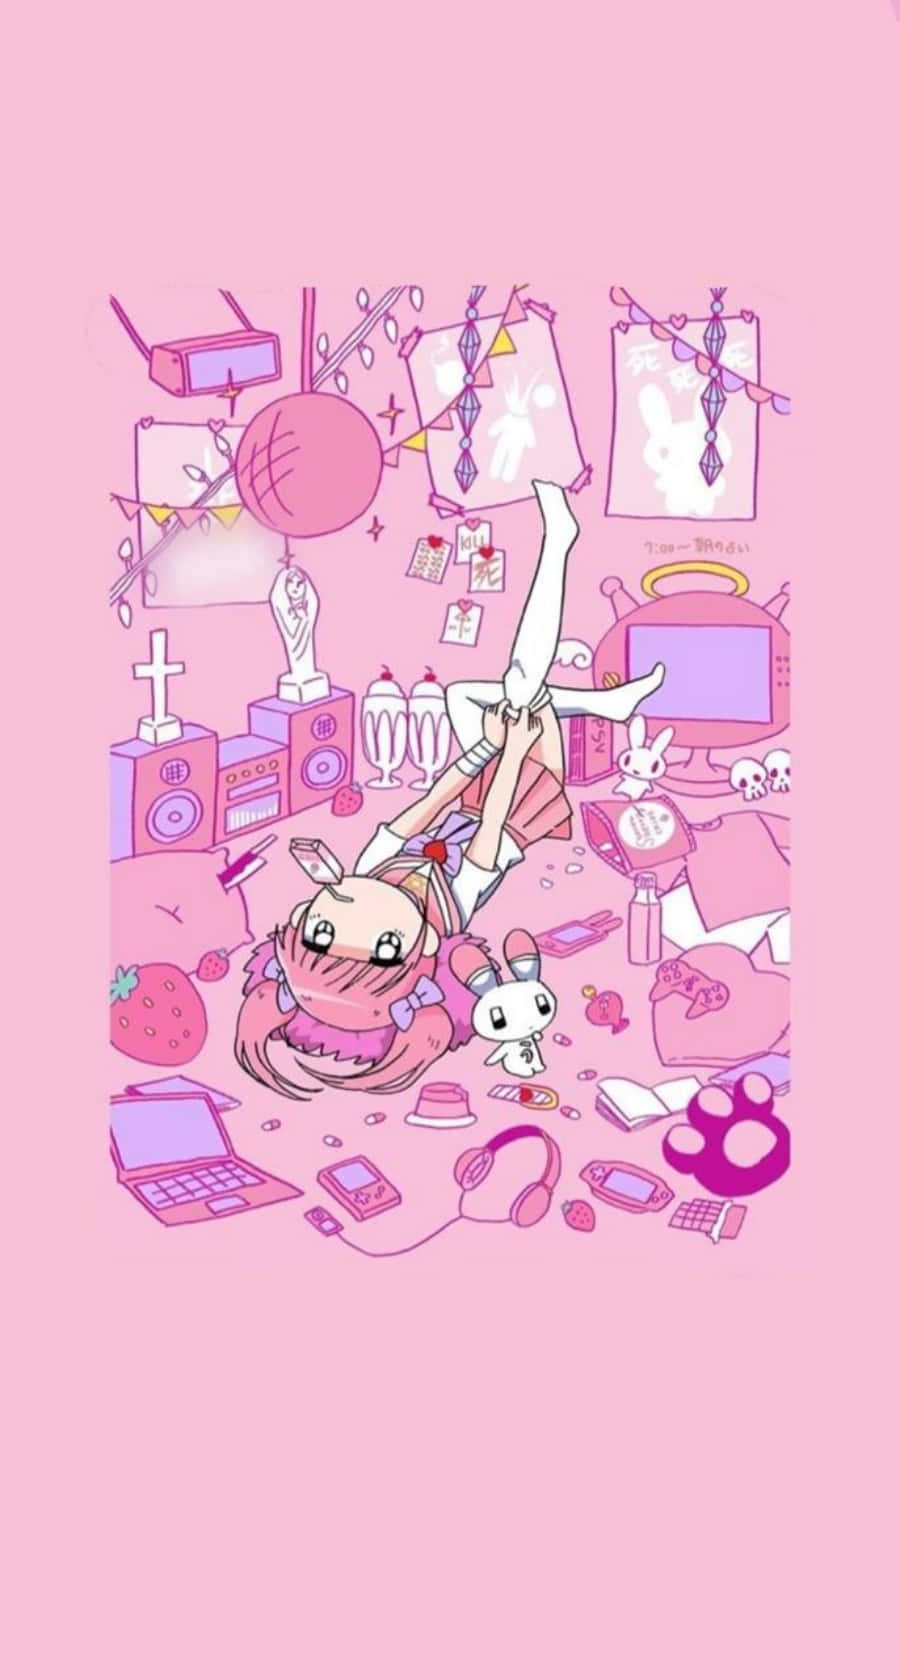 Aesthetic anime girl pink background with her cat - Kawaii